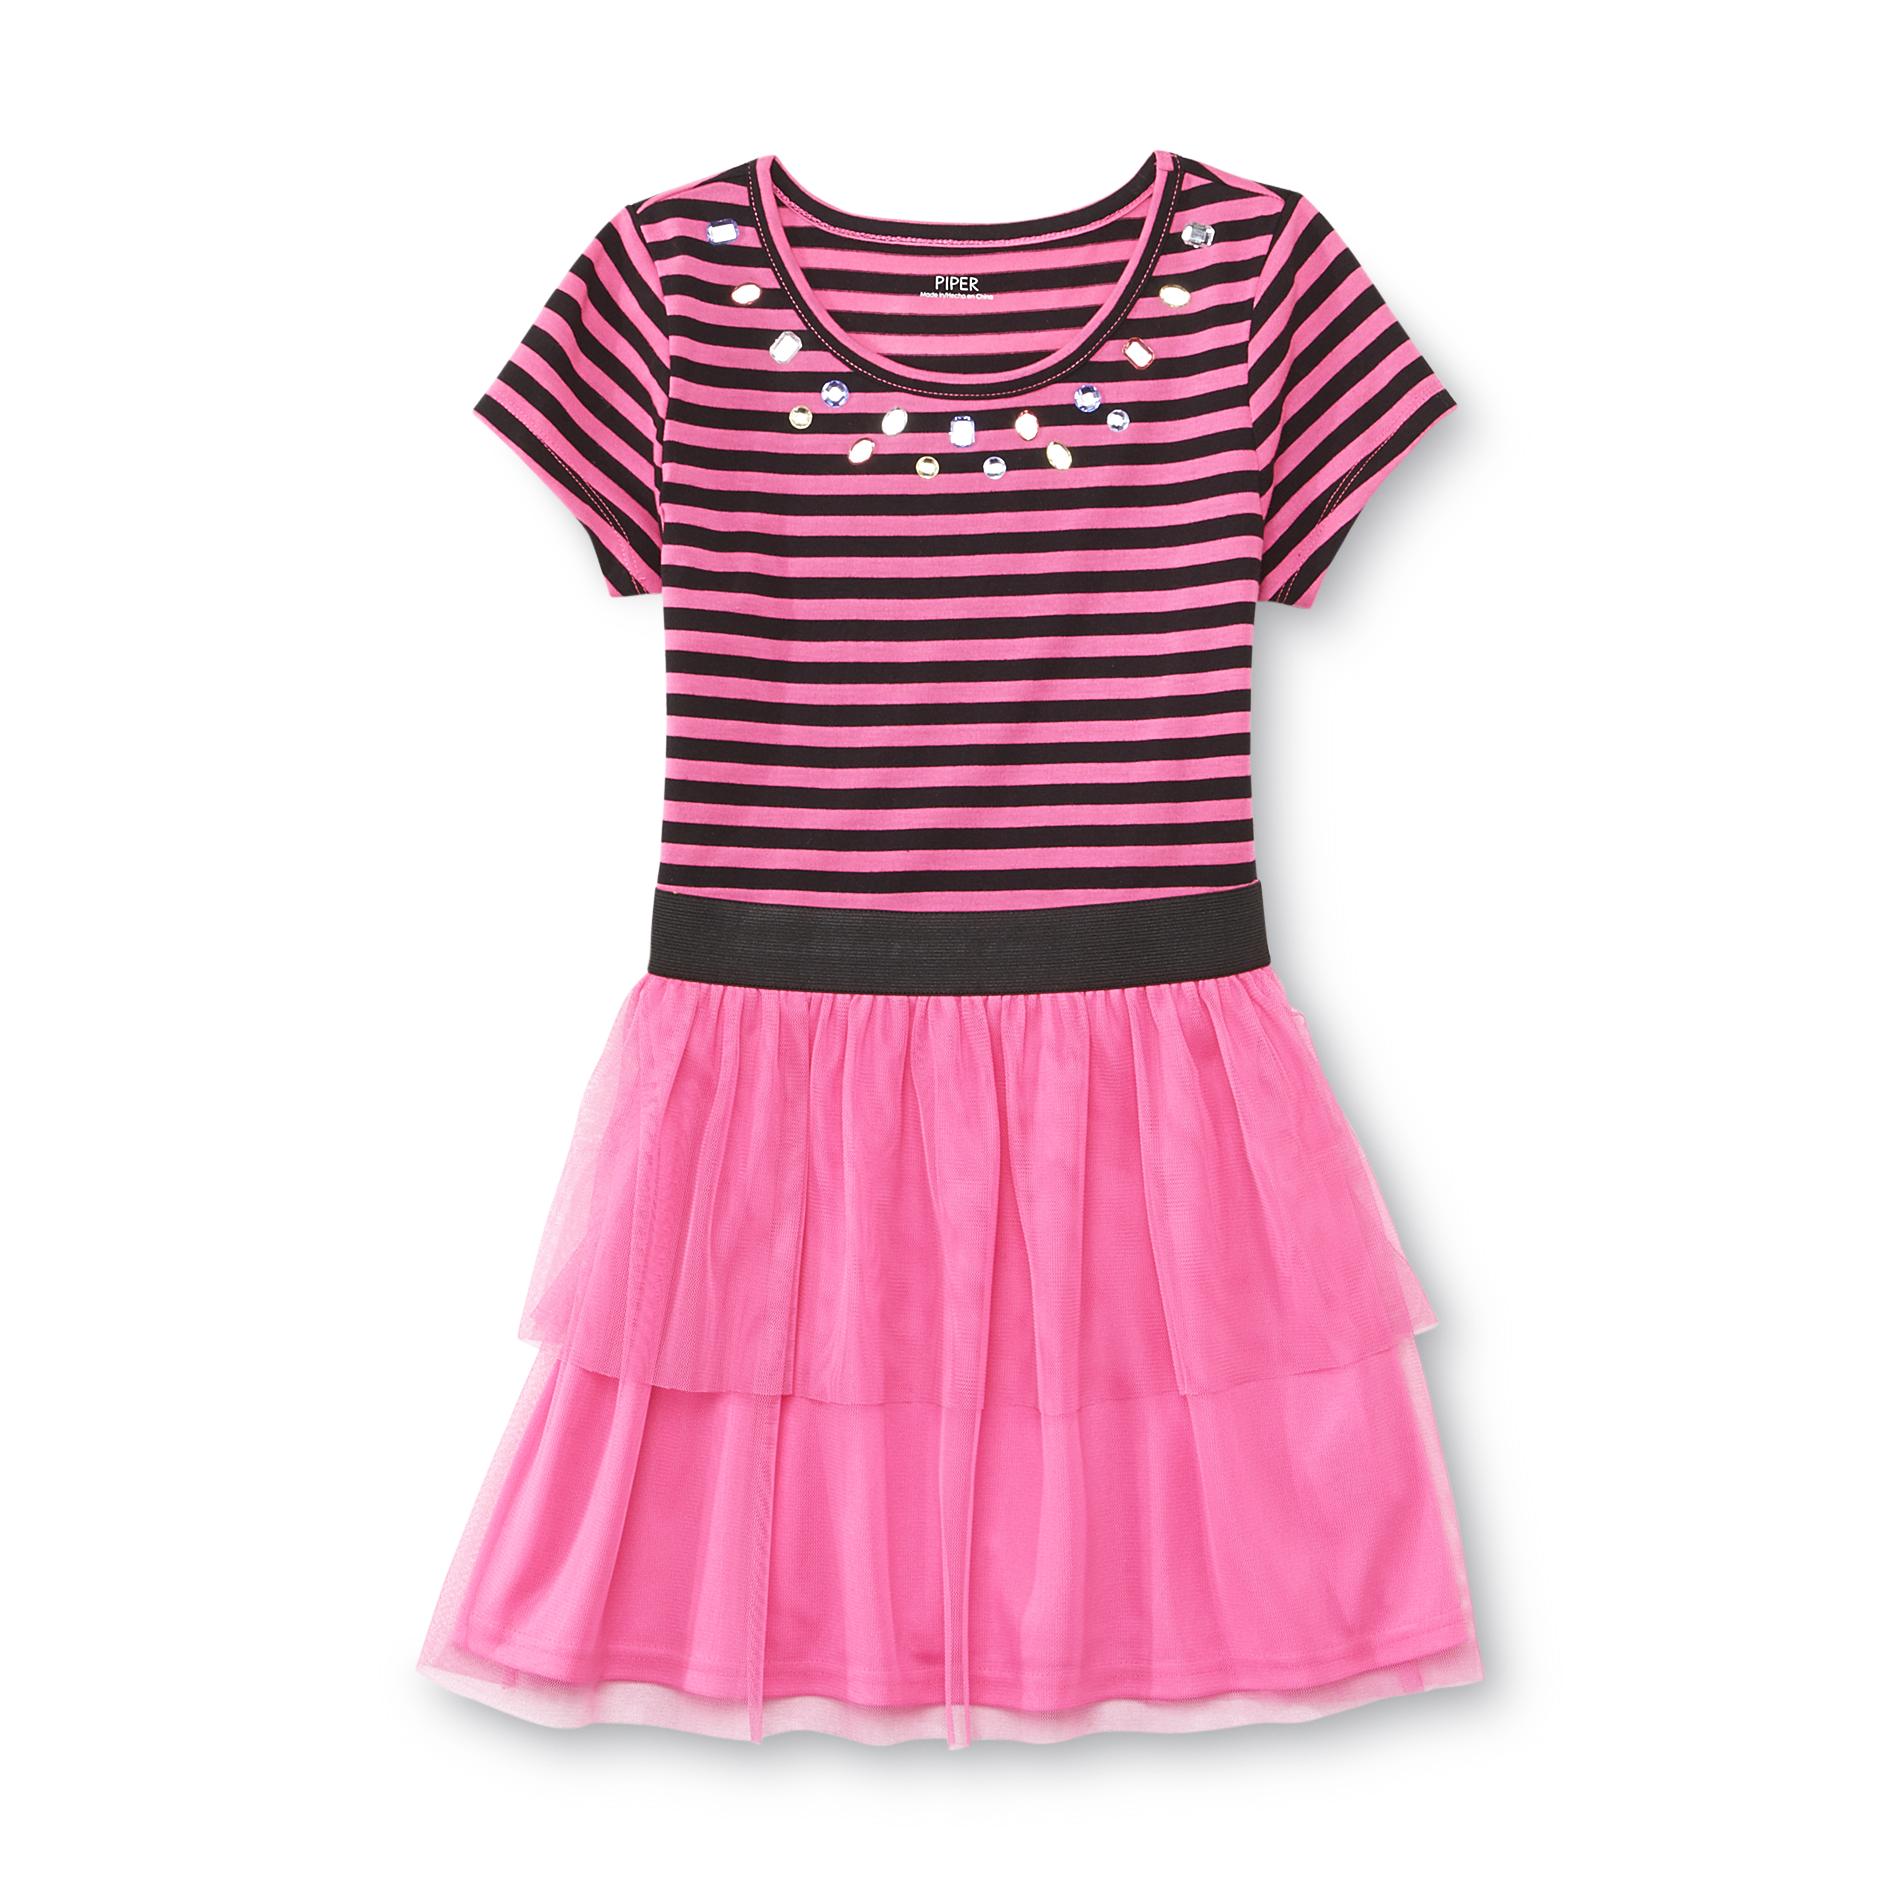 Piper Girl's Tiered Dress - Bejeweled Neckline